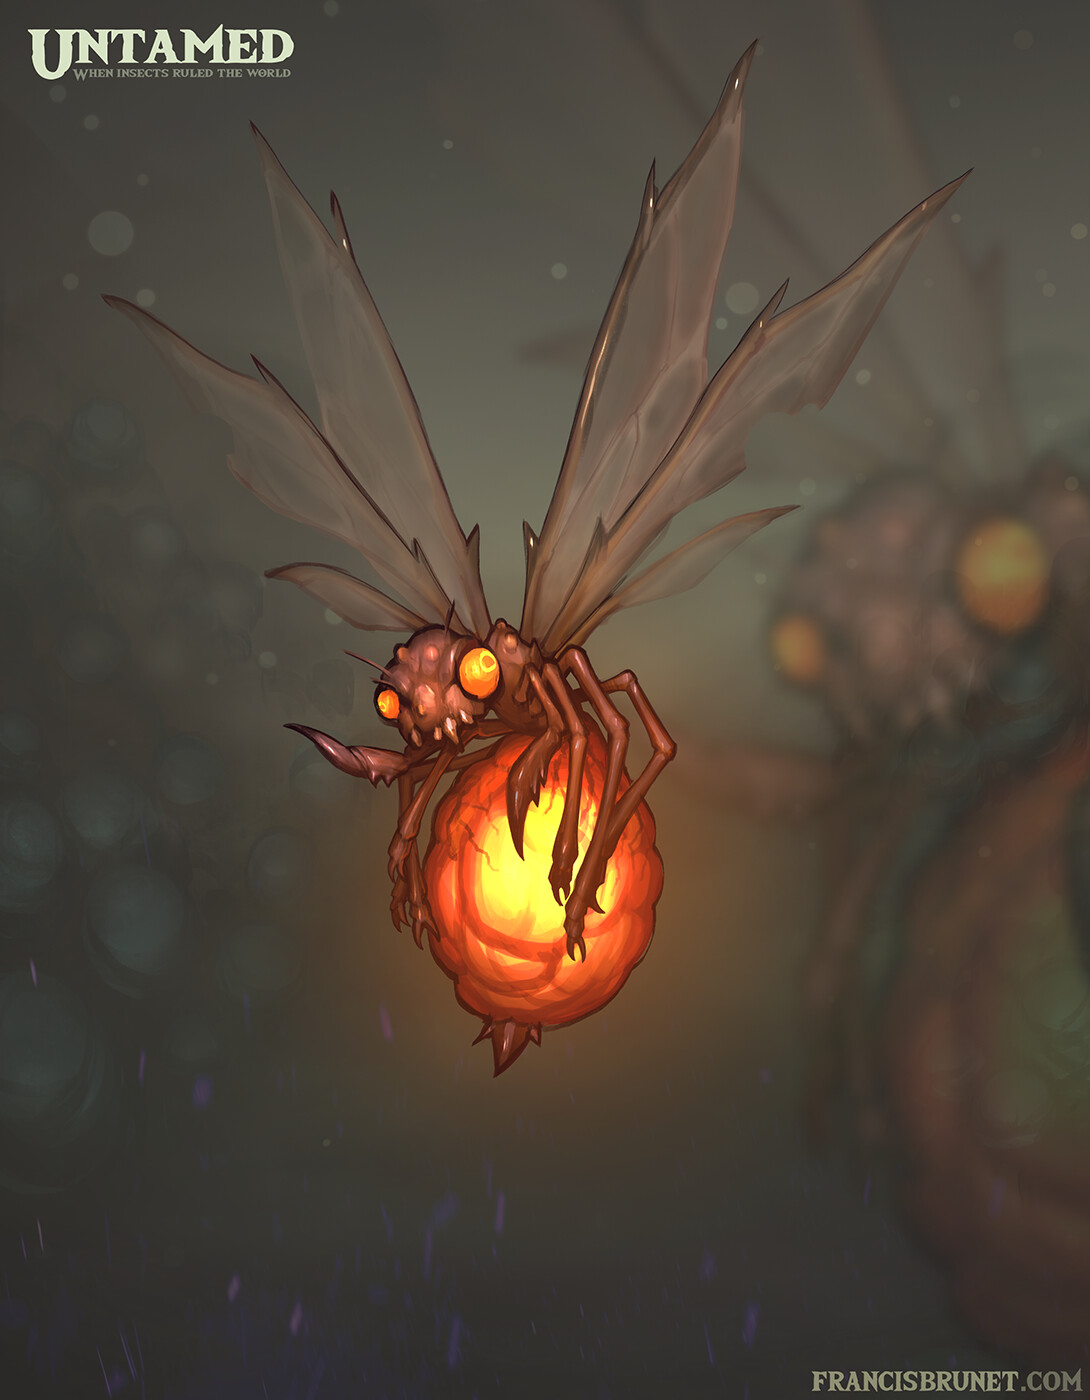 Glow Flies 
These mutated wasps develop an unstable stomach full of corrosive acid that never stop growing. They are ordered around to explode for devastating effect.